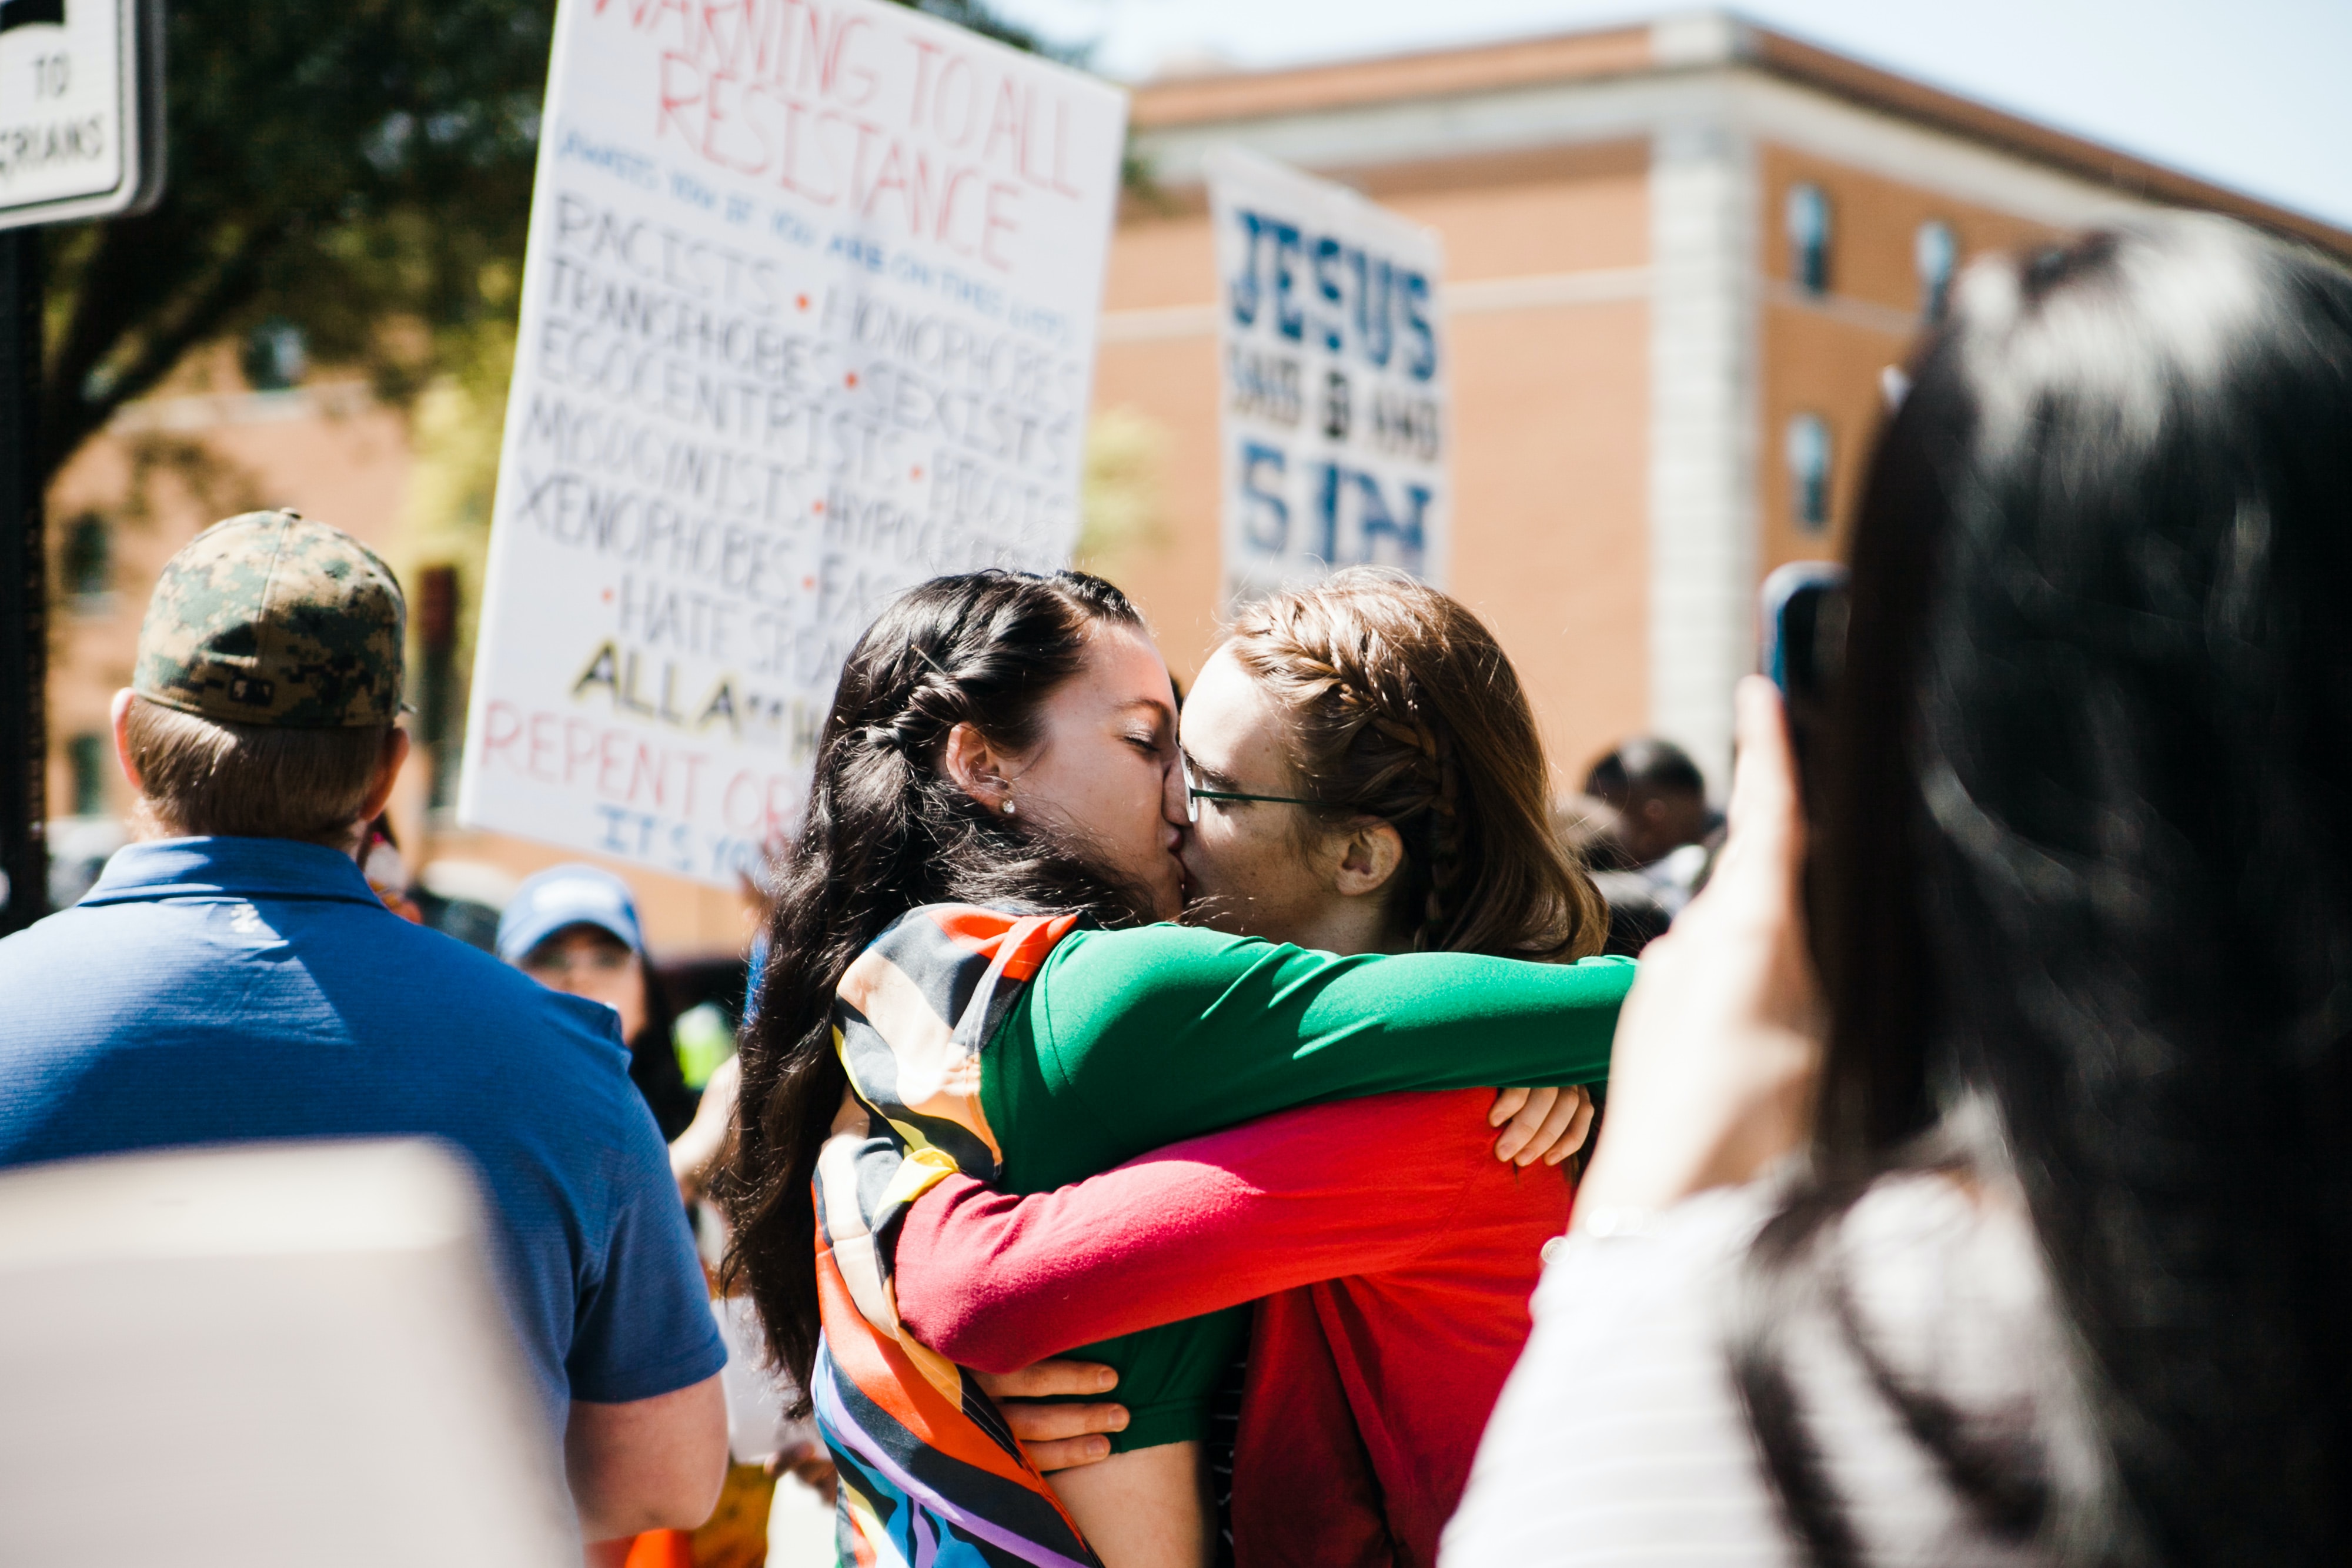 Two couples kissing in the middle of a protest. | Source: Unsplash